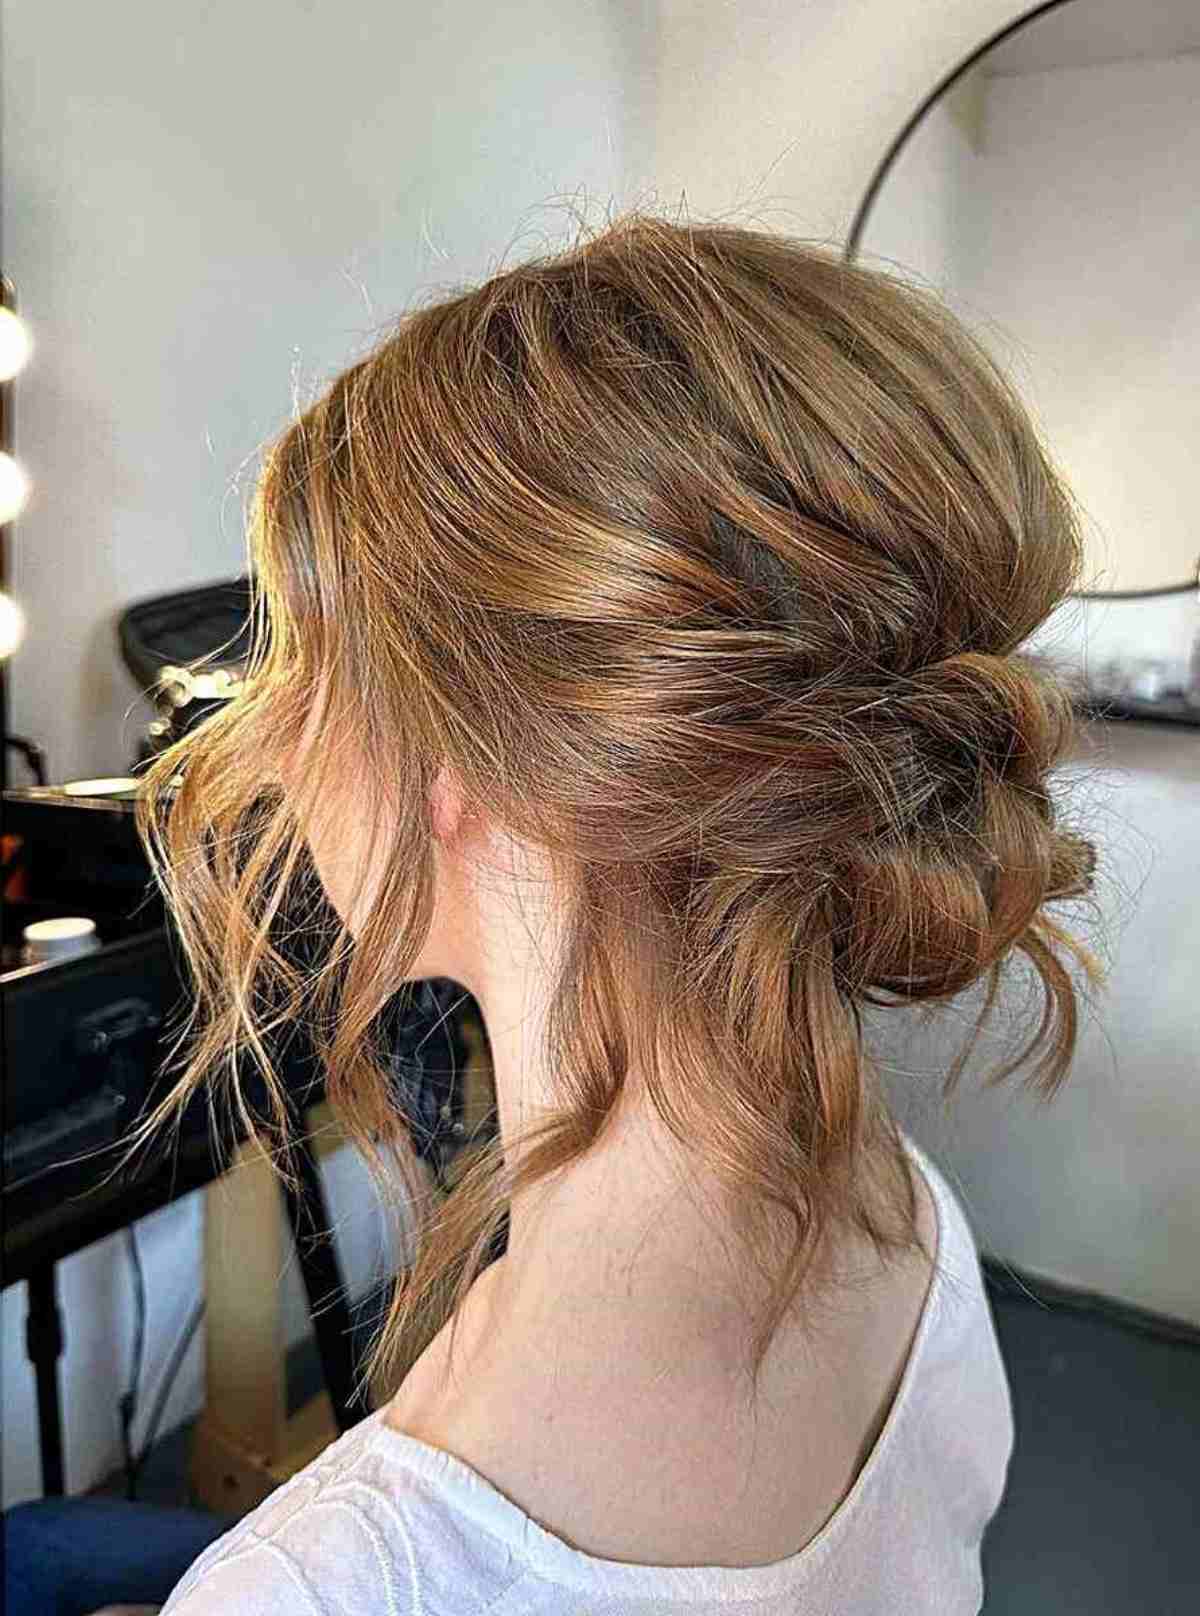 12 Ways to Style a Bow in Hair for All Occasions – The Right Hairstyles